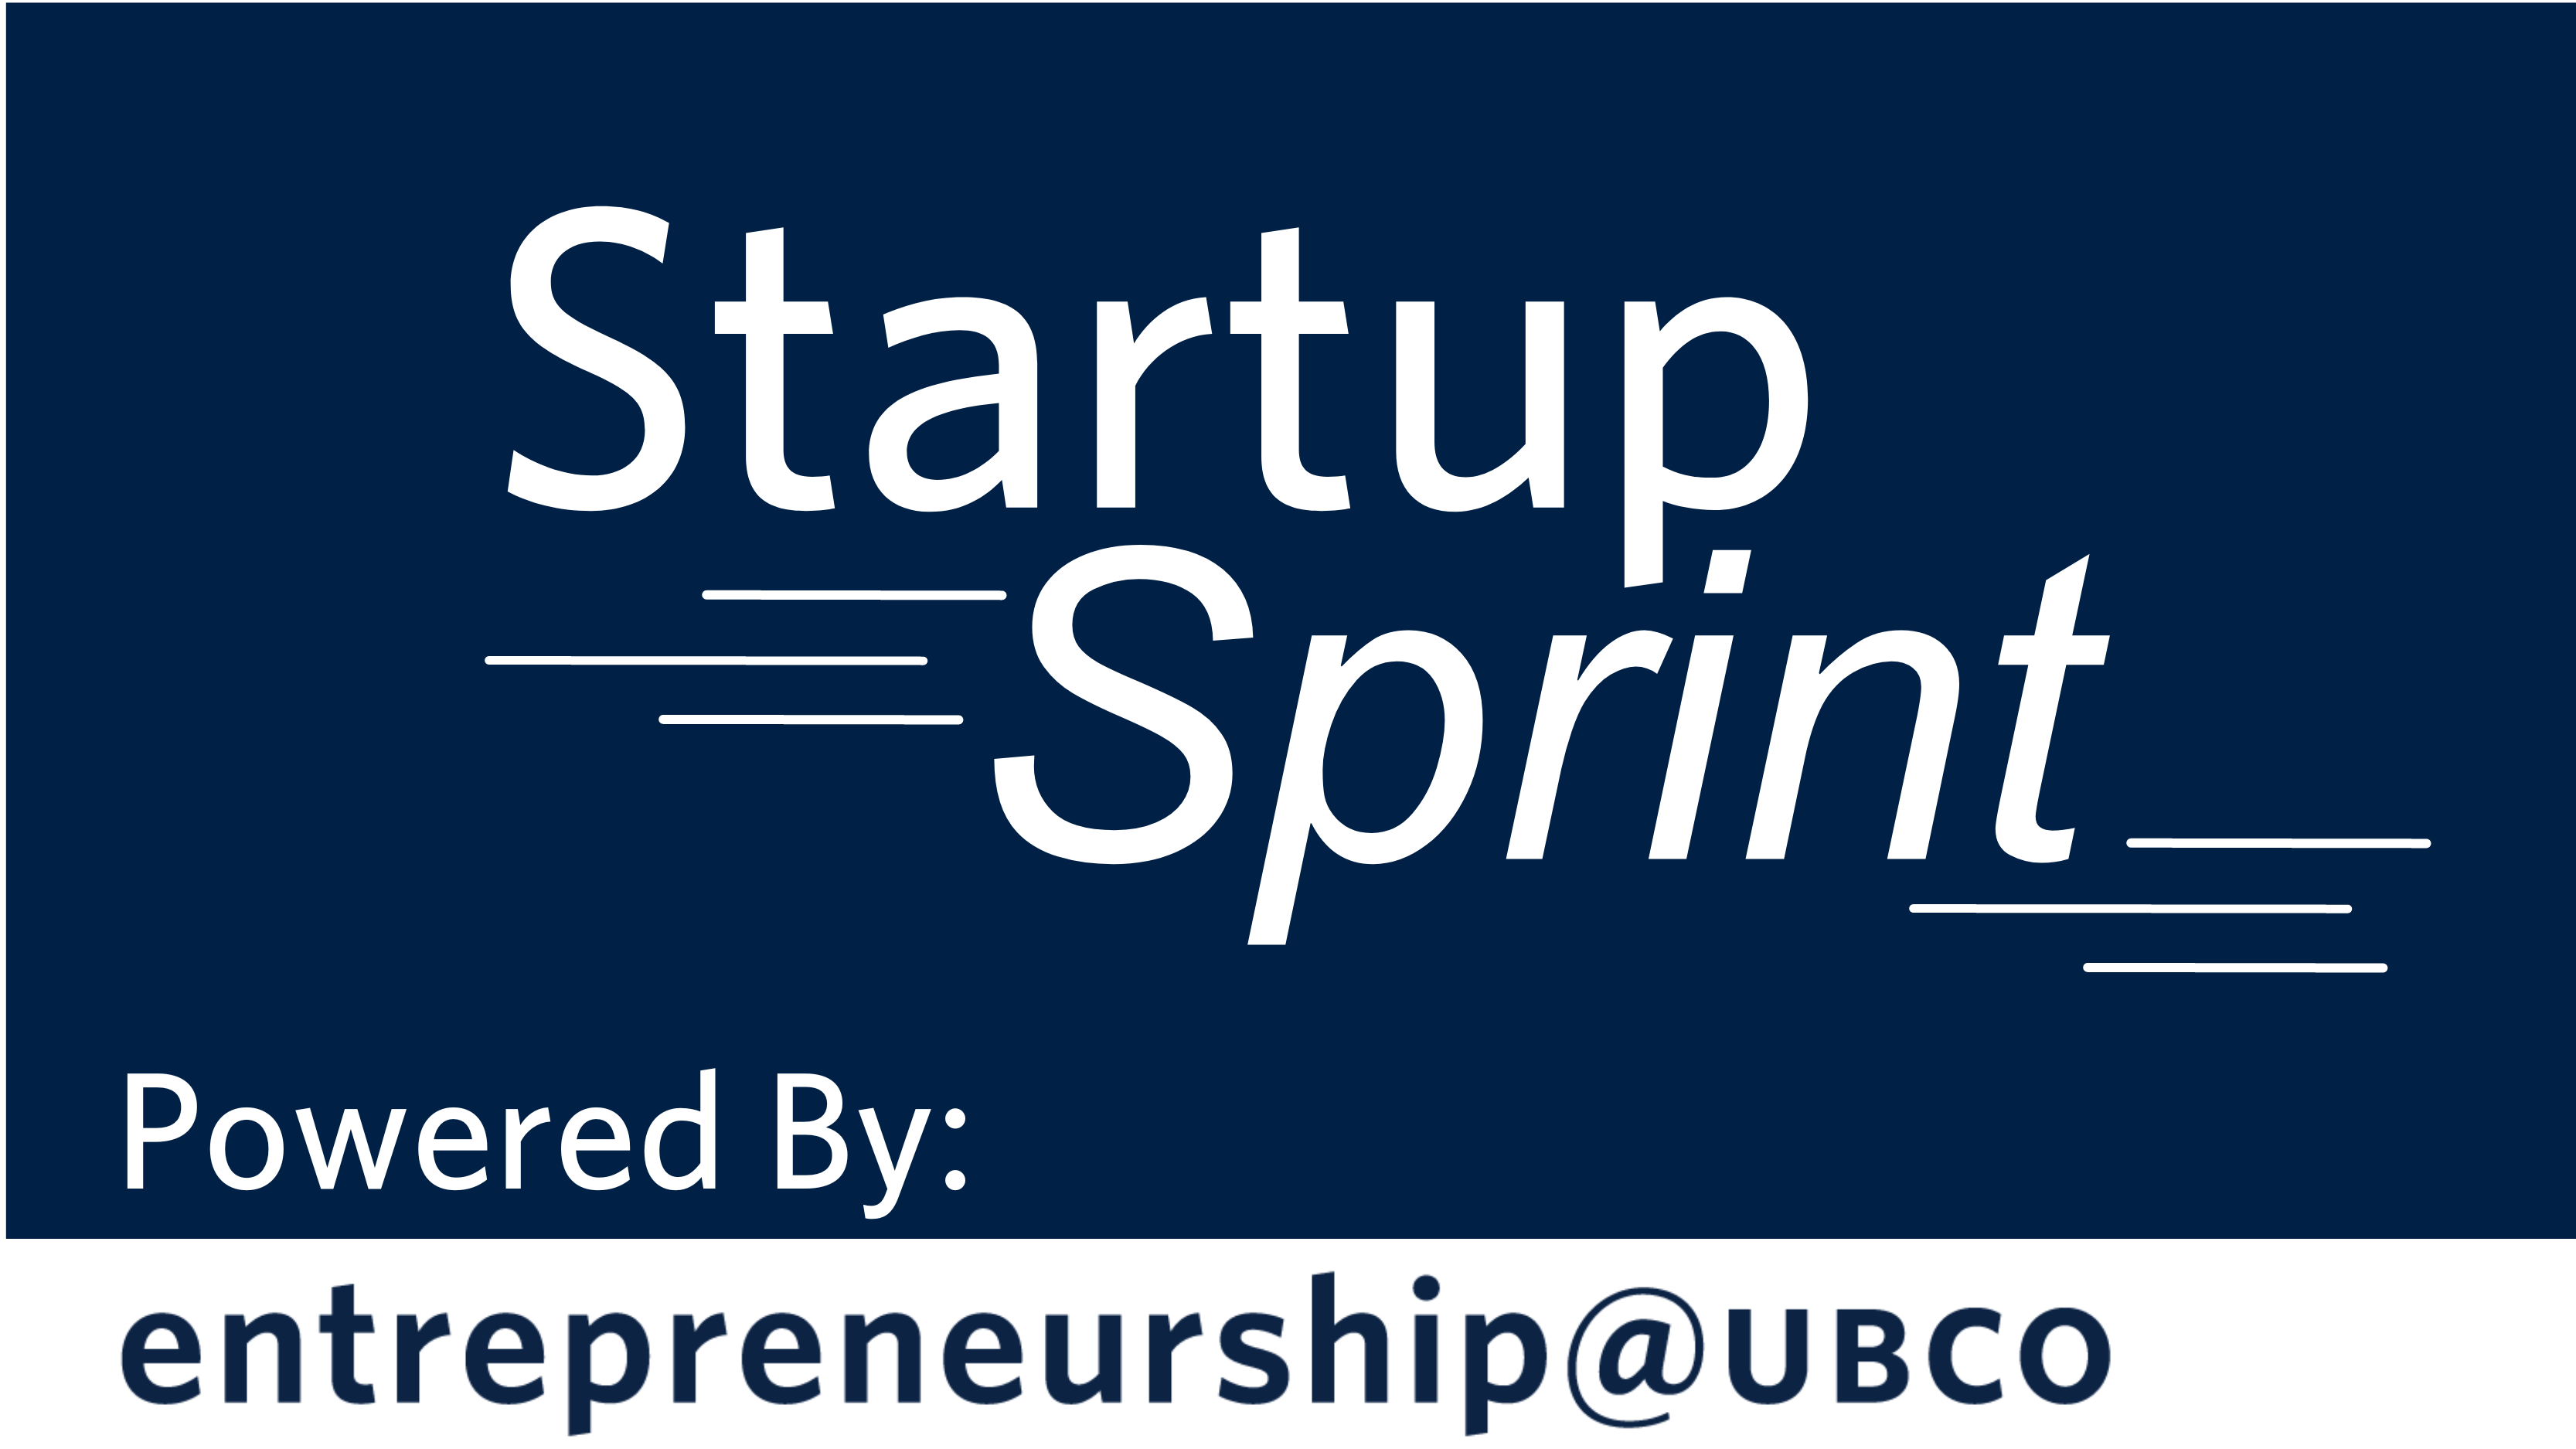 Startup Sprint event graphic. The graphic has a Startup Sprint logo and contains the text "Powered By: entrepreneurship@UBCO"